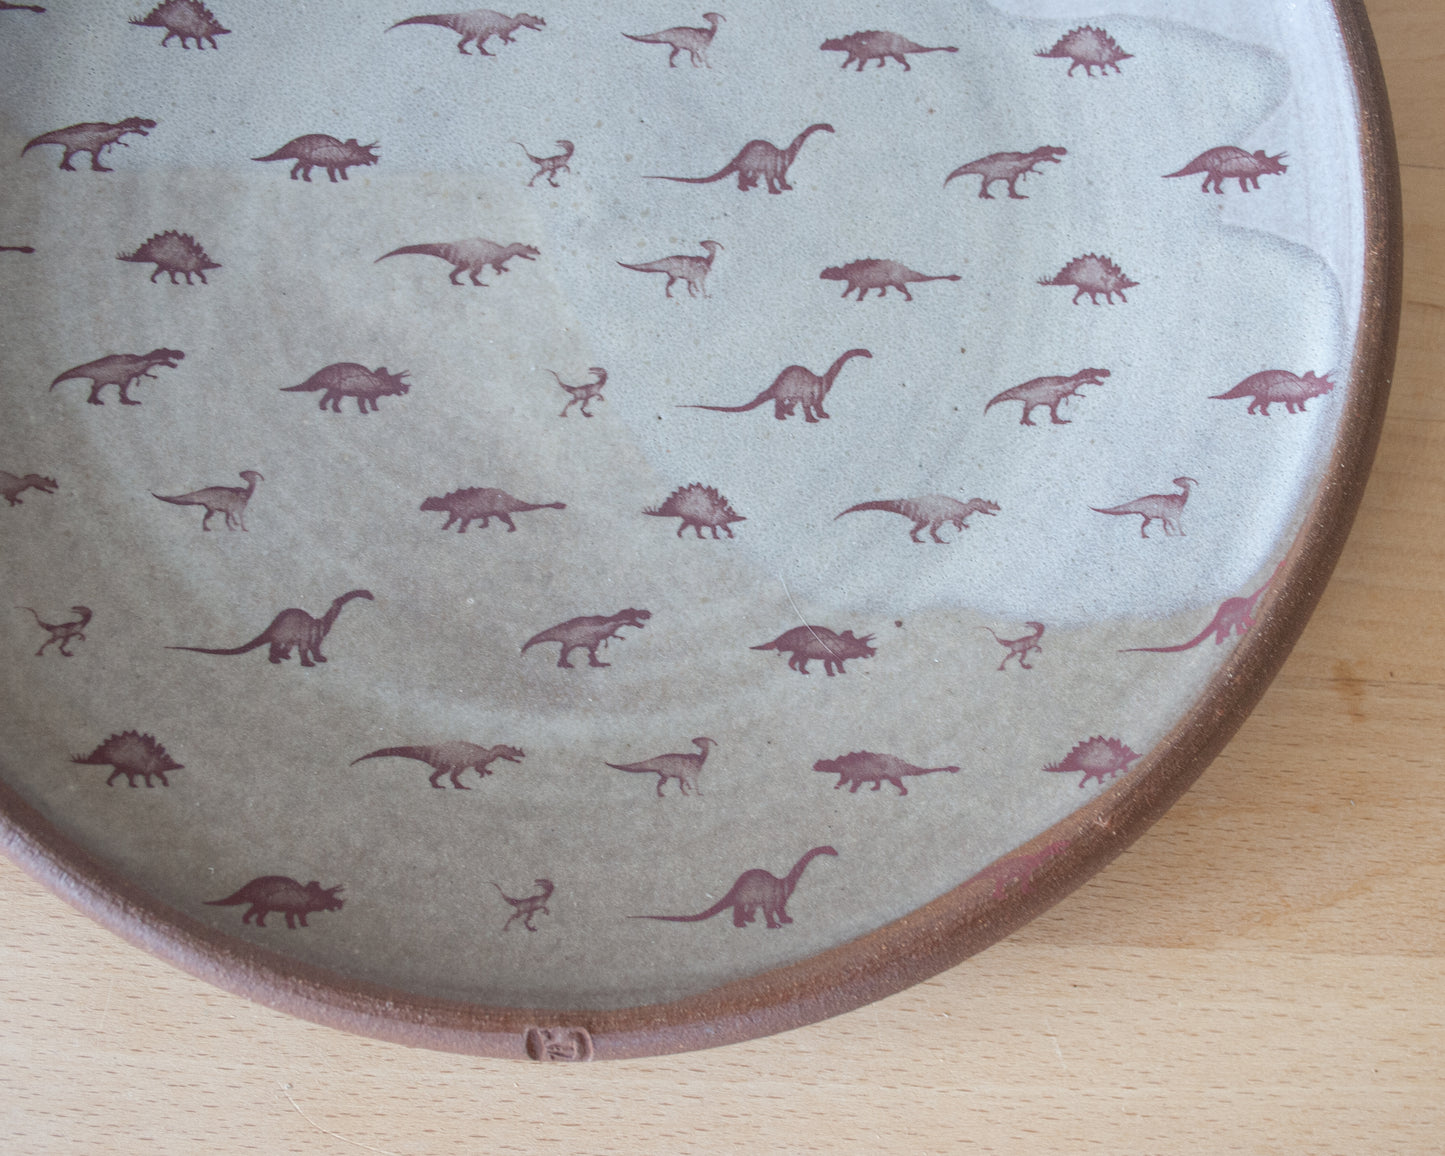 Side Plate with small dinosaurs